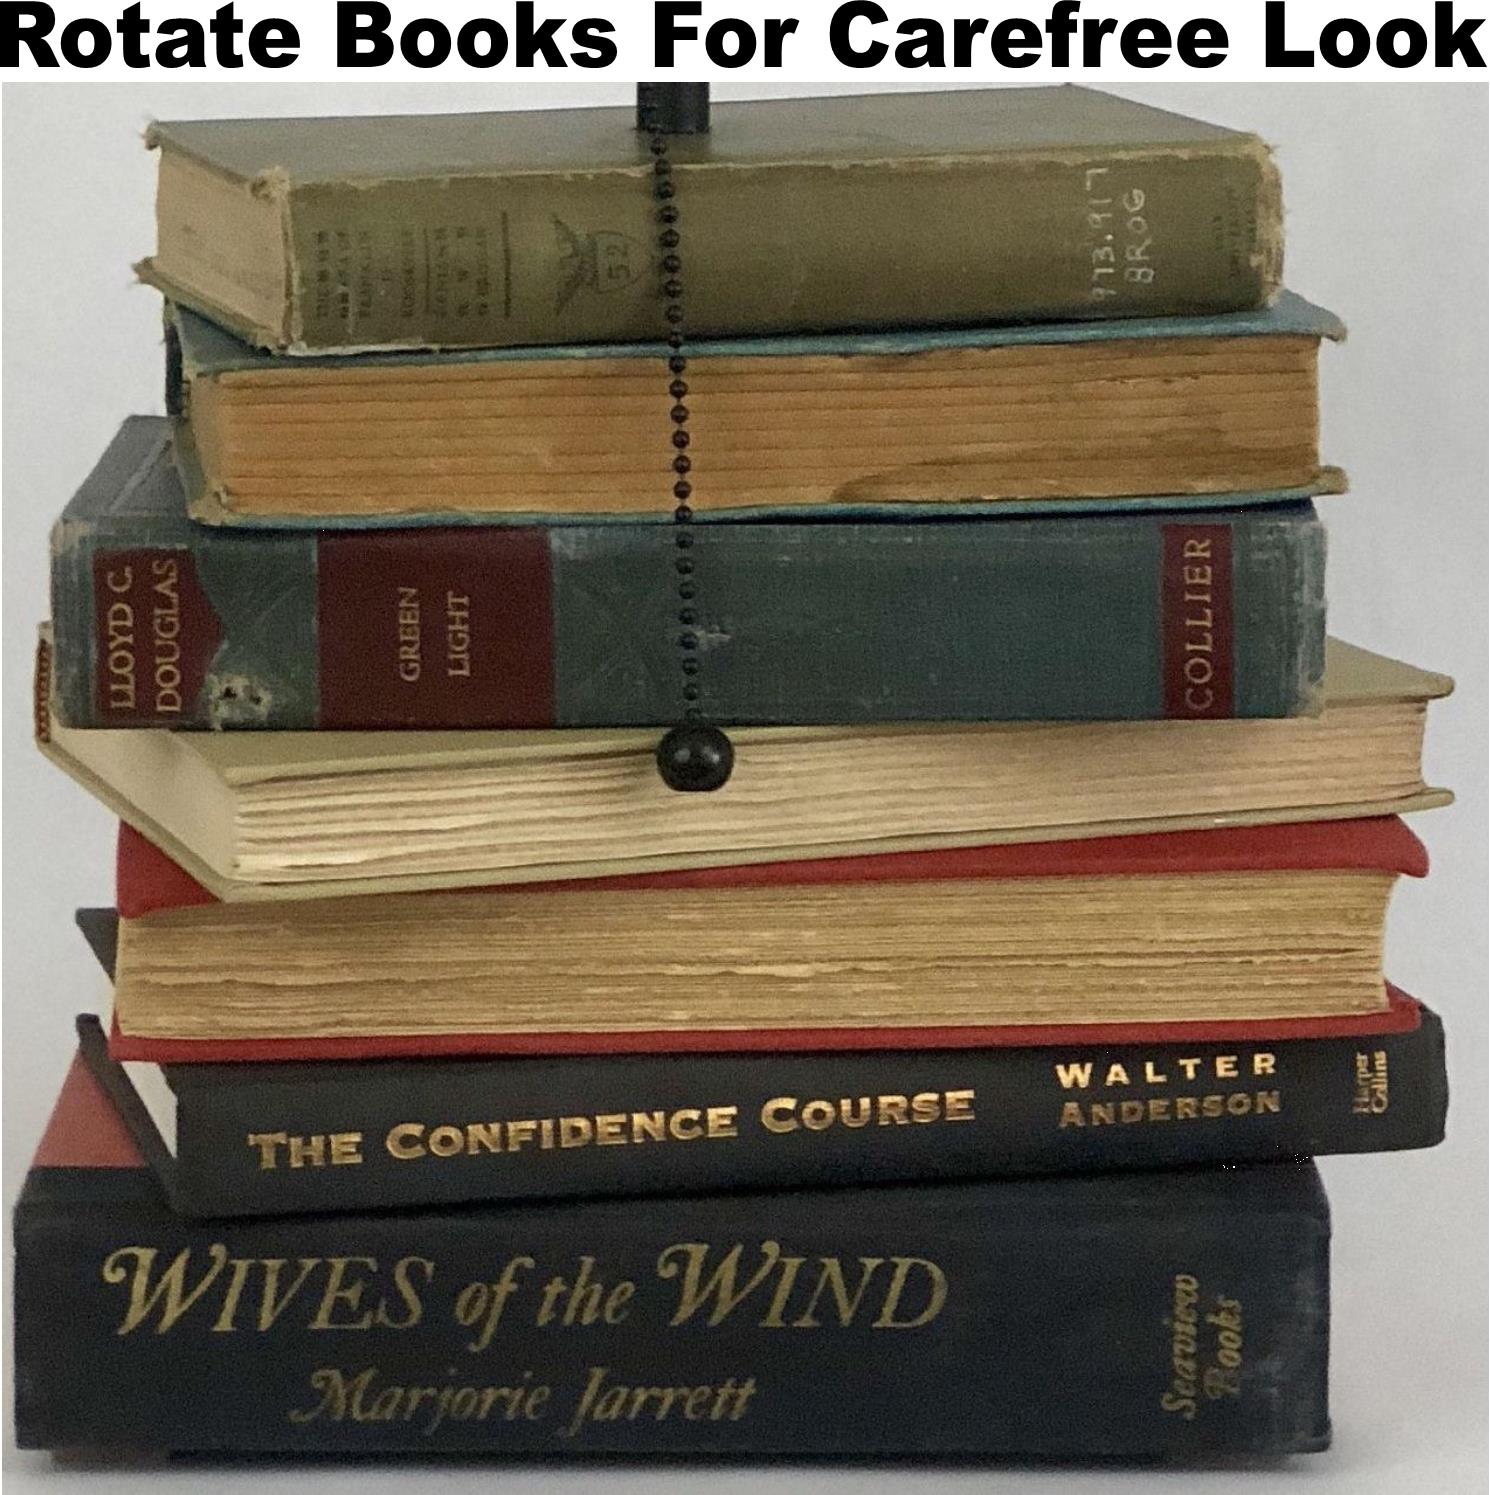 Rotate Books for Carefree Look